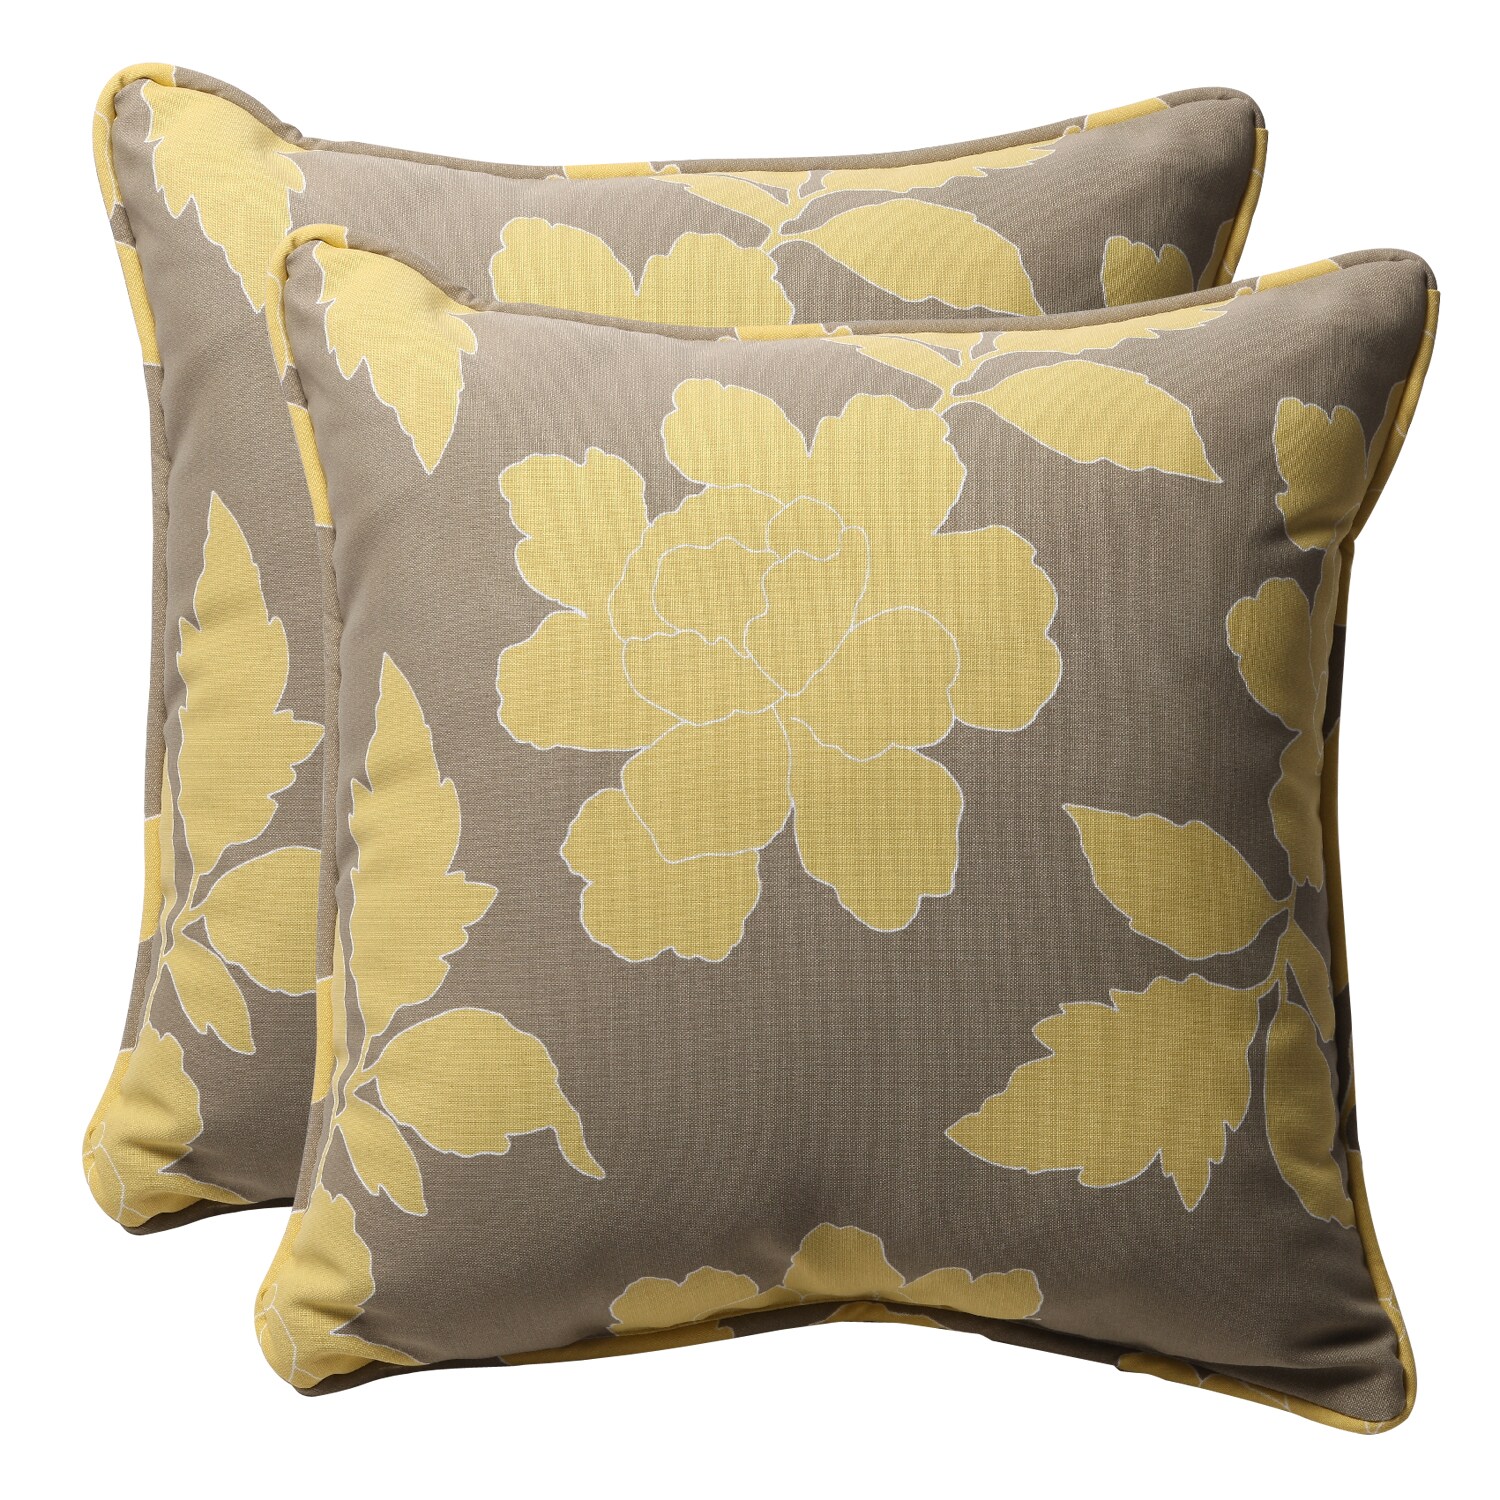 Decorative Grey/ Yellow Floral Square Outdoor Toss Pillows (Set of 2